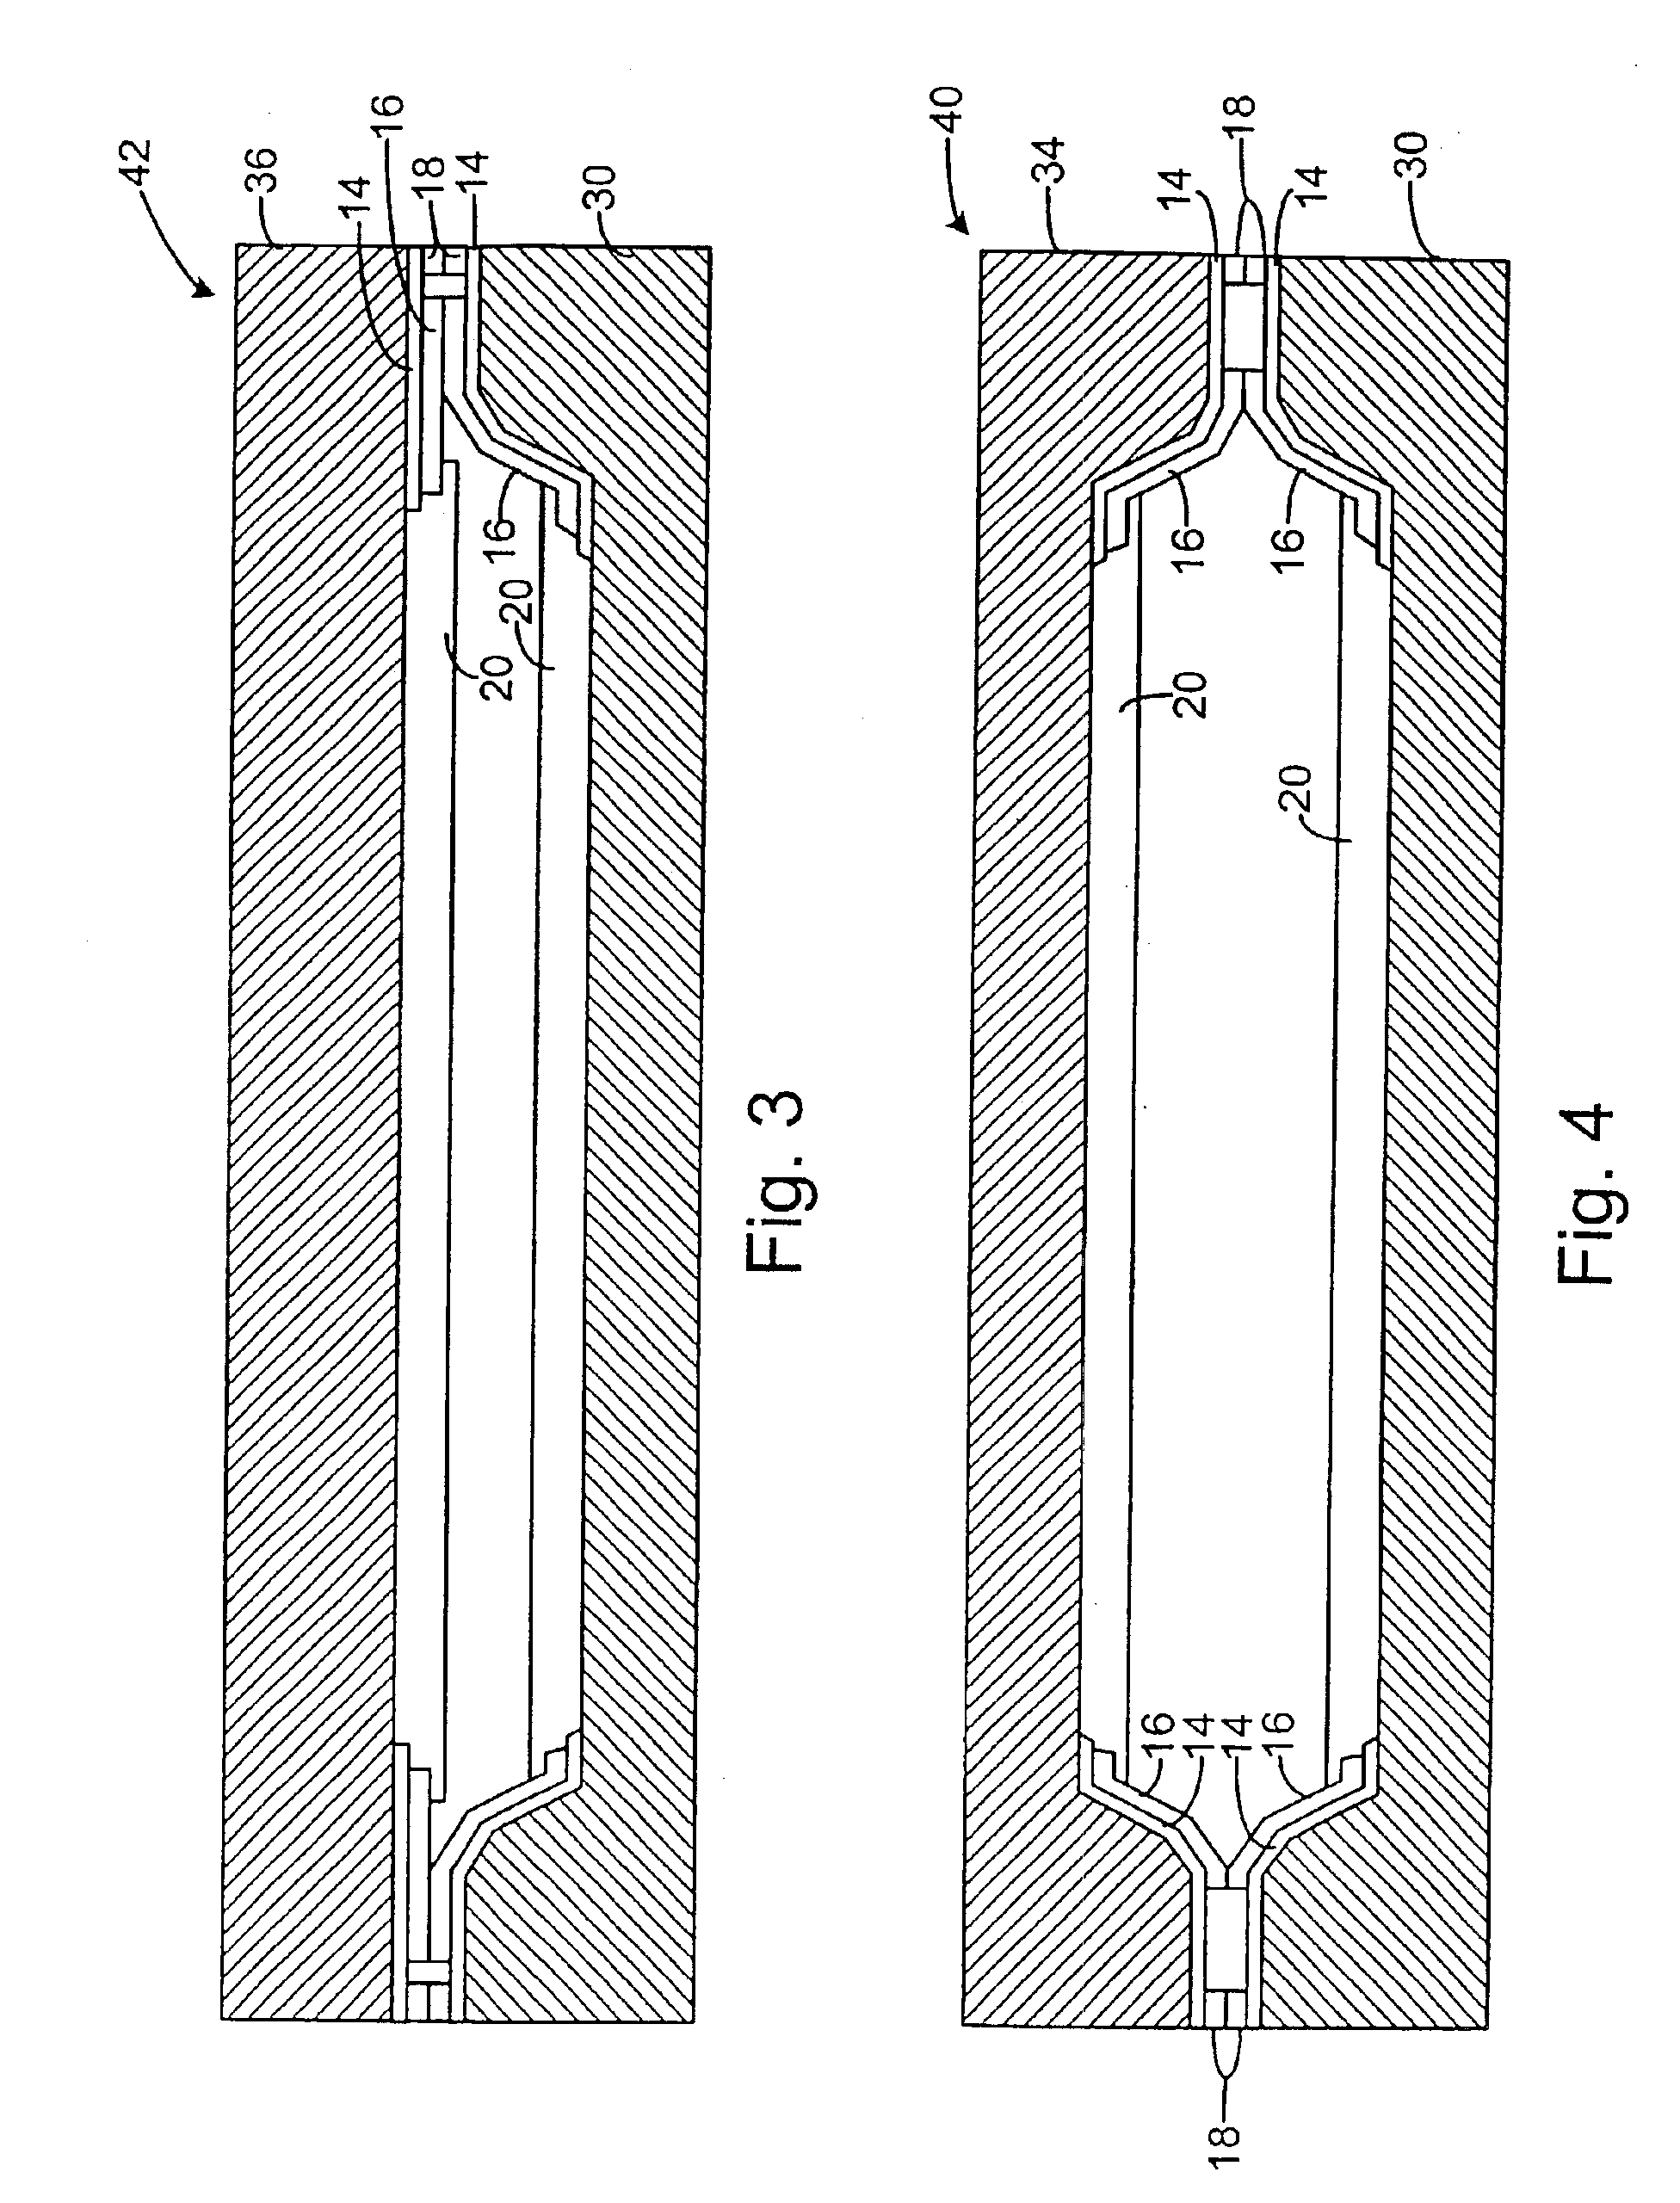 Multi-level integrated circuit for wide-gap substrate bonding